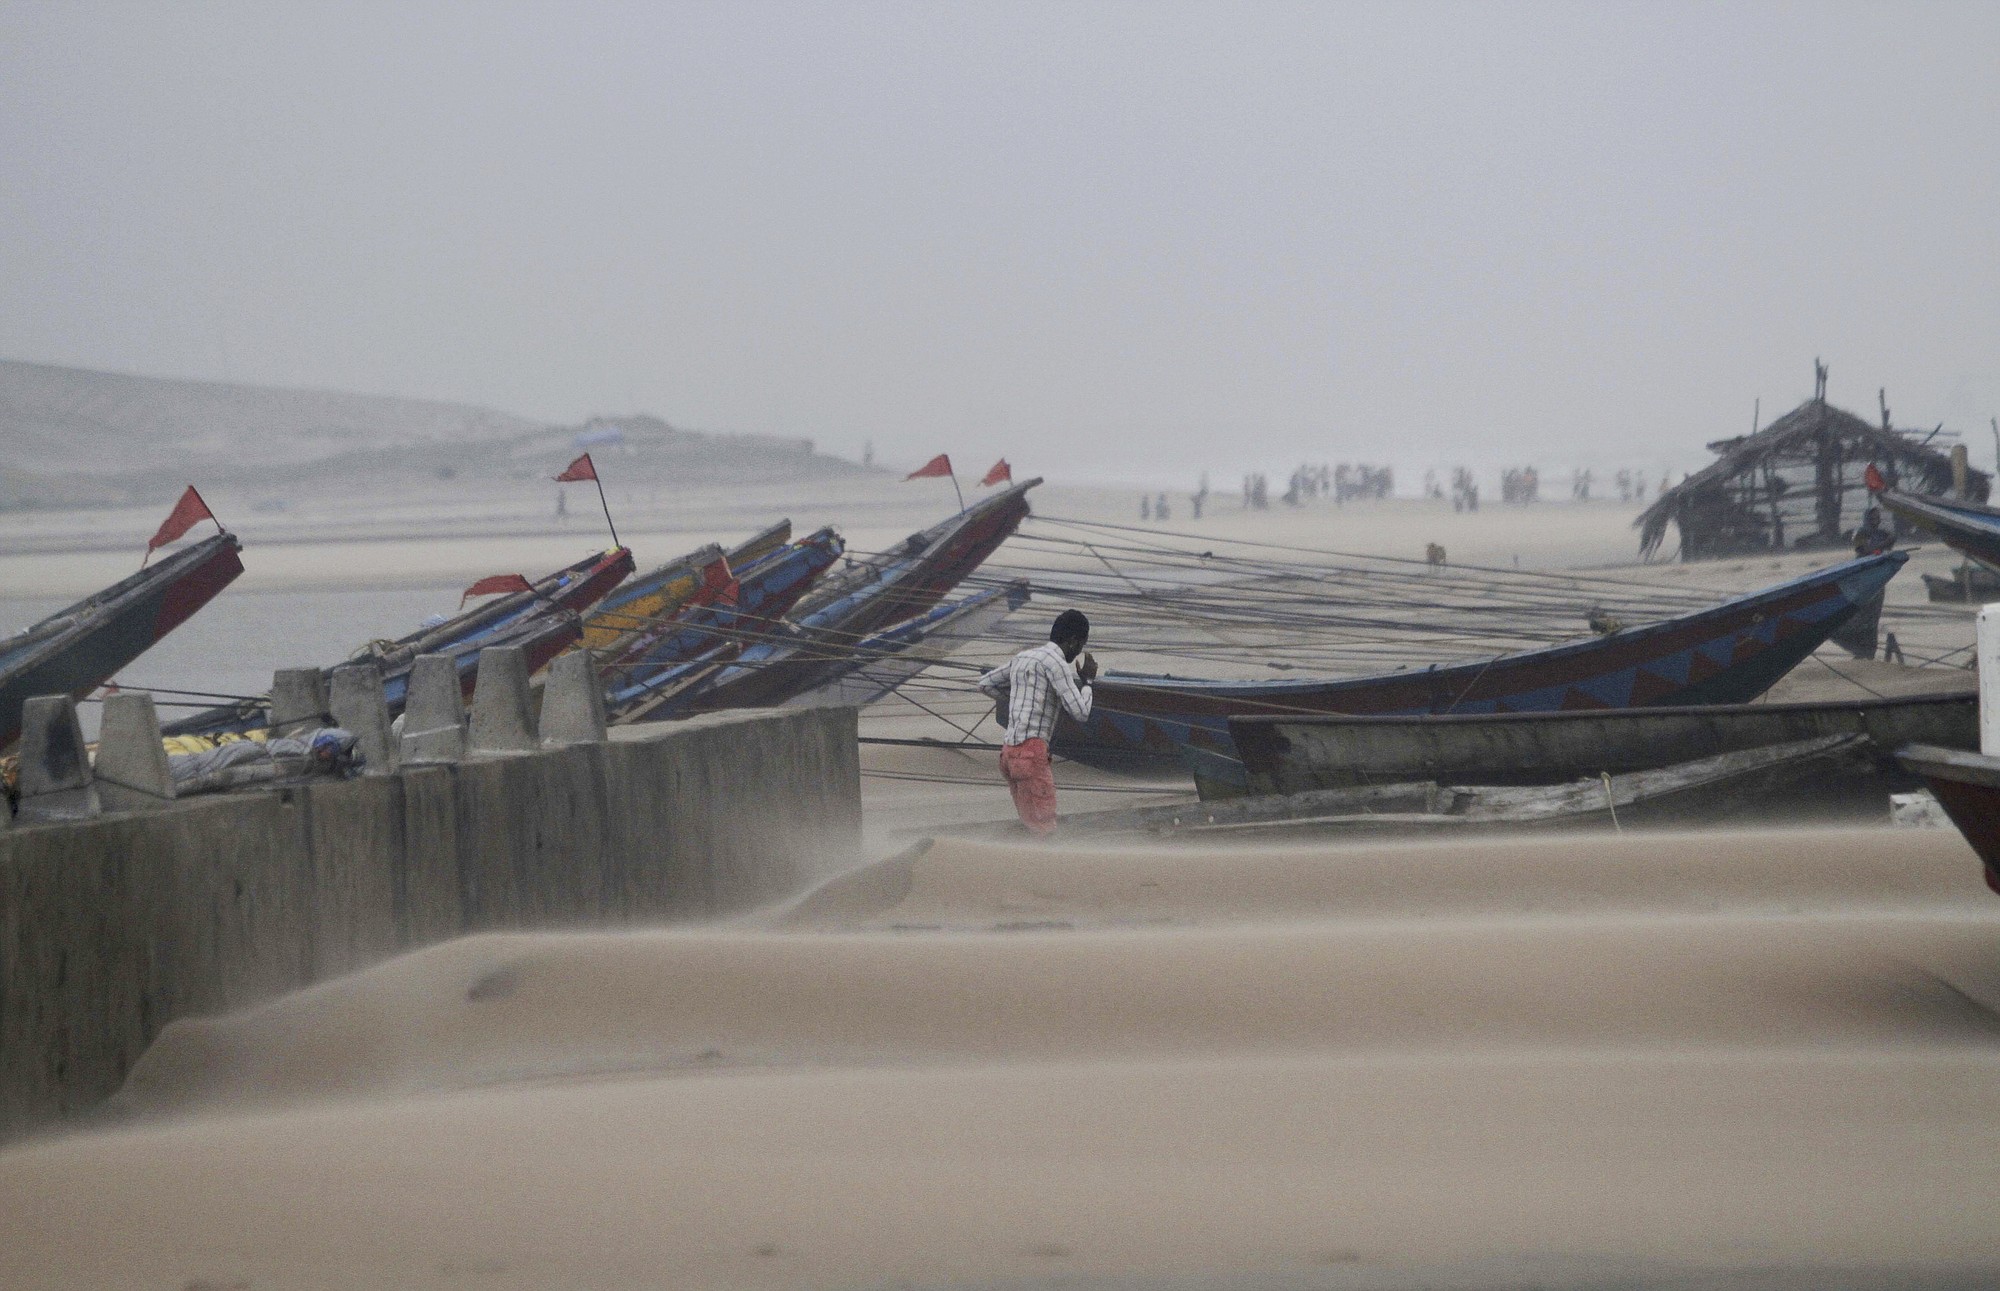 An Indian fisherman walks near the anchored fishing boats as strong winds blow a day after a powerful cyclone pounded the Bay of Bengal coast in Gopalpur, Orissa, about 285 kilometers north east of Visakhapatnam, India, on Monday.